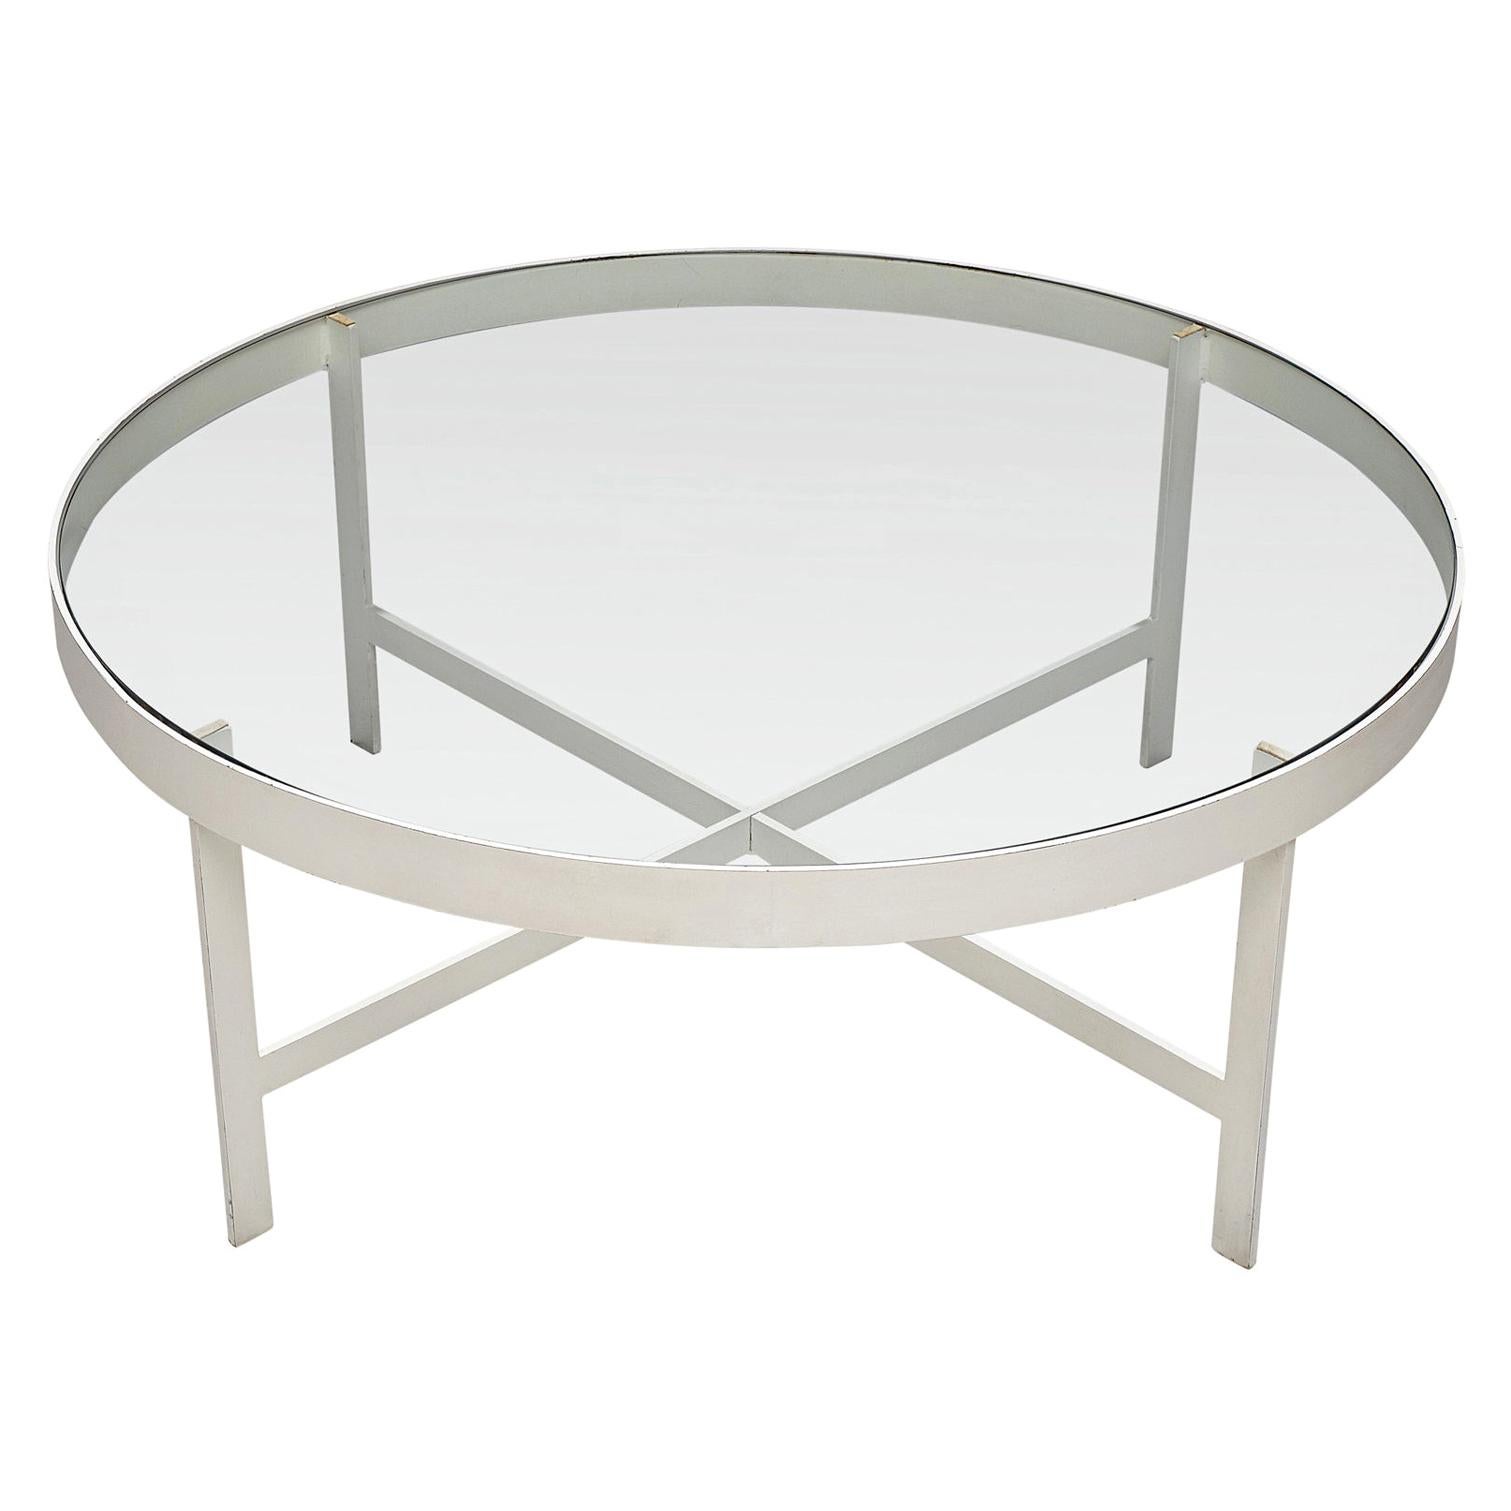 Janni Van Pelt Coffee Table in White Steel and Glass